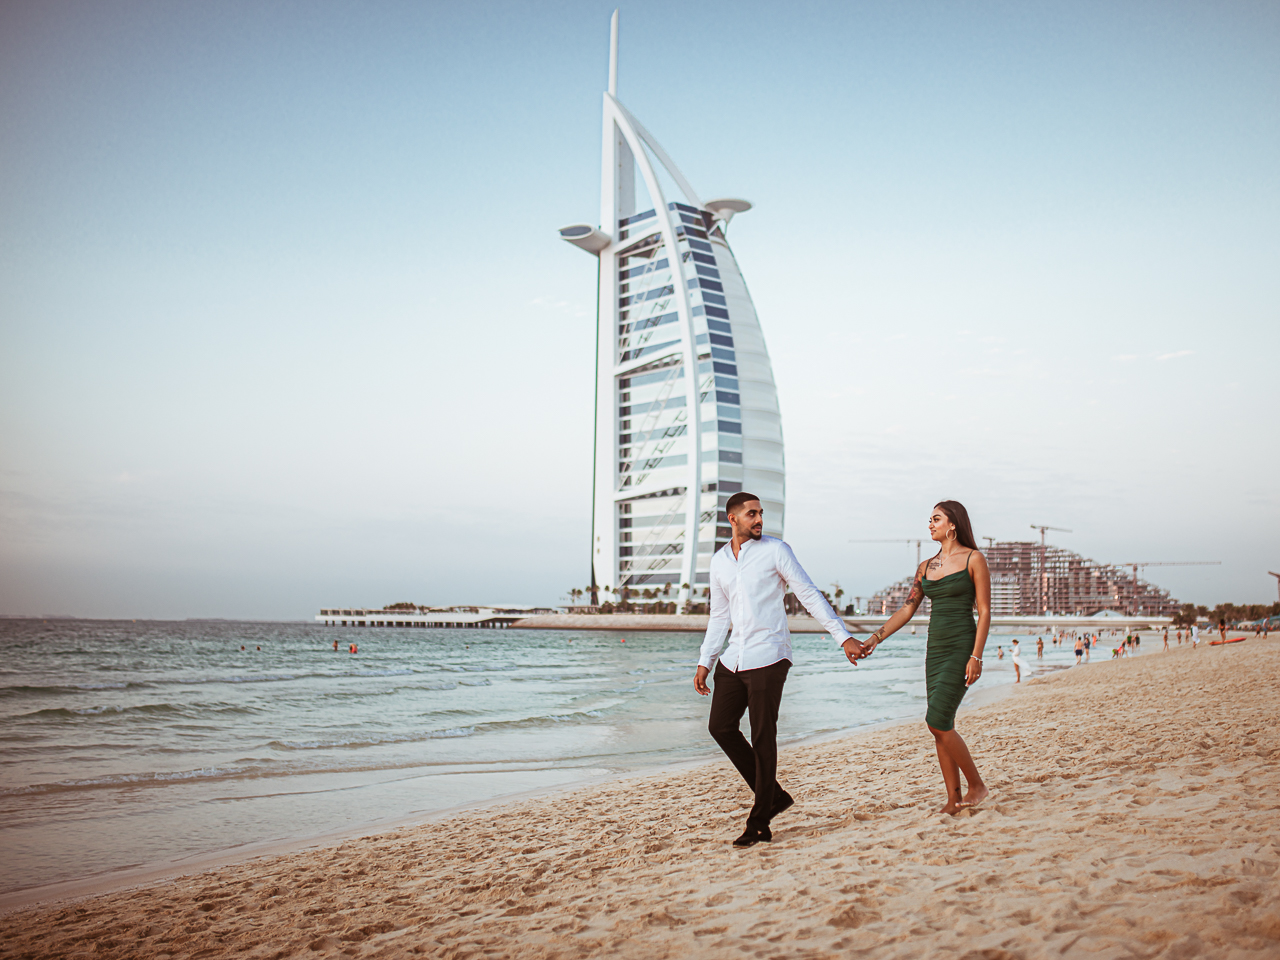 featured photo spot in Dubai for proposals photo shoots